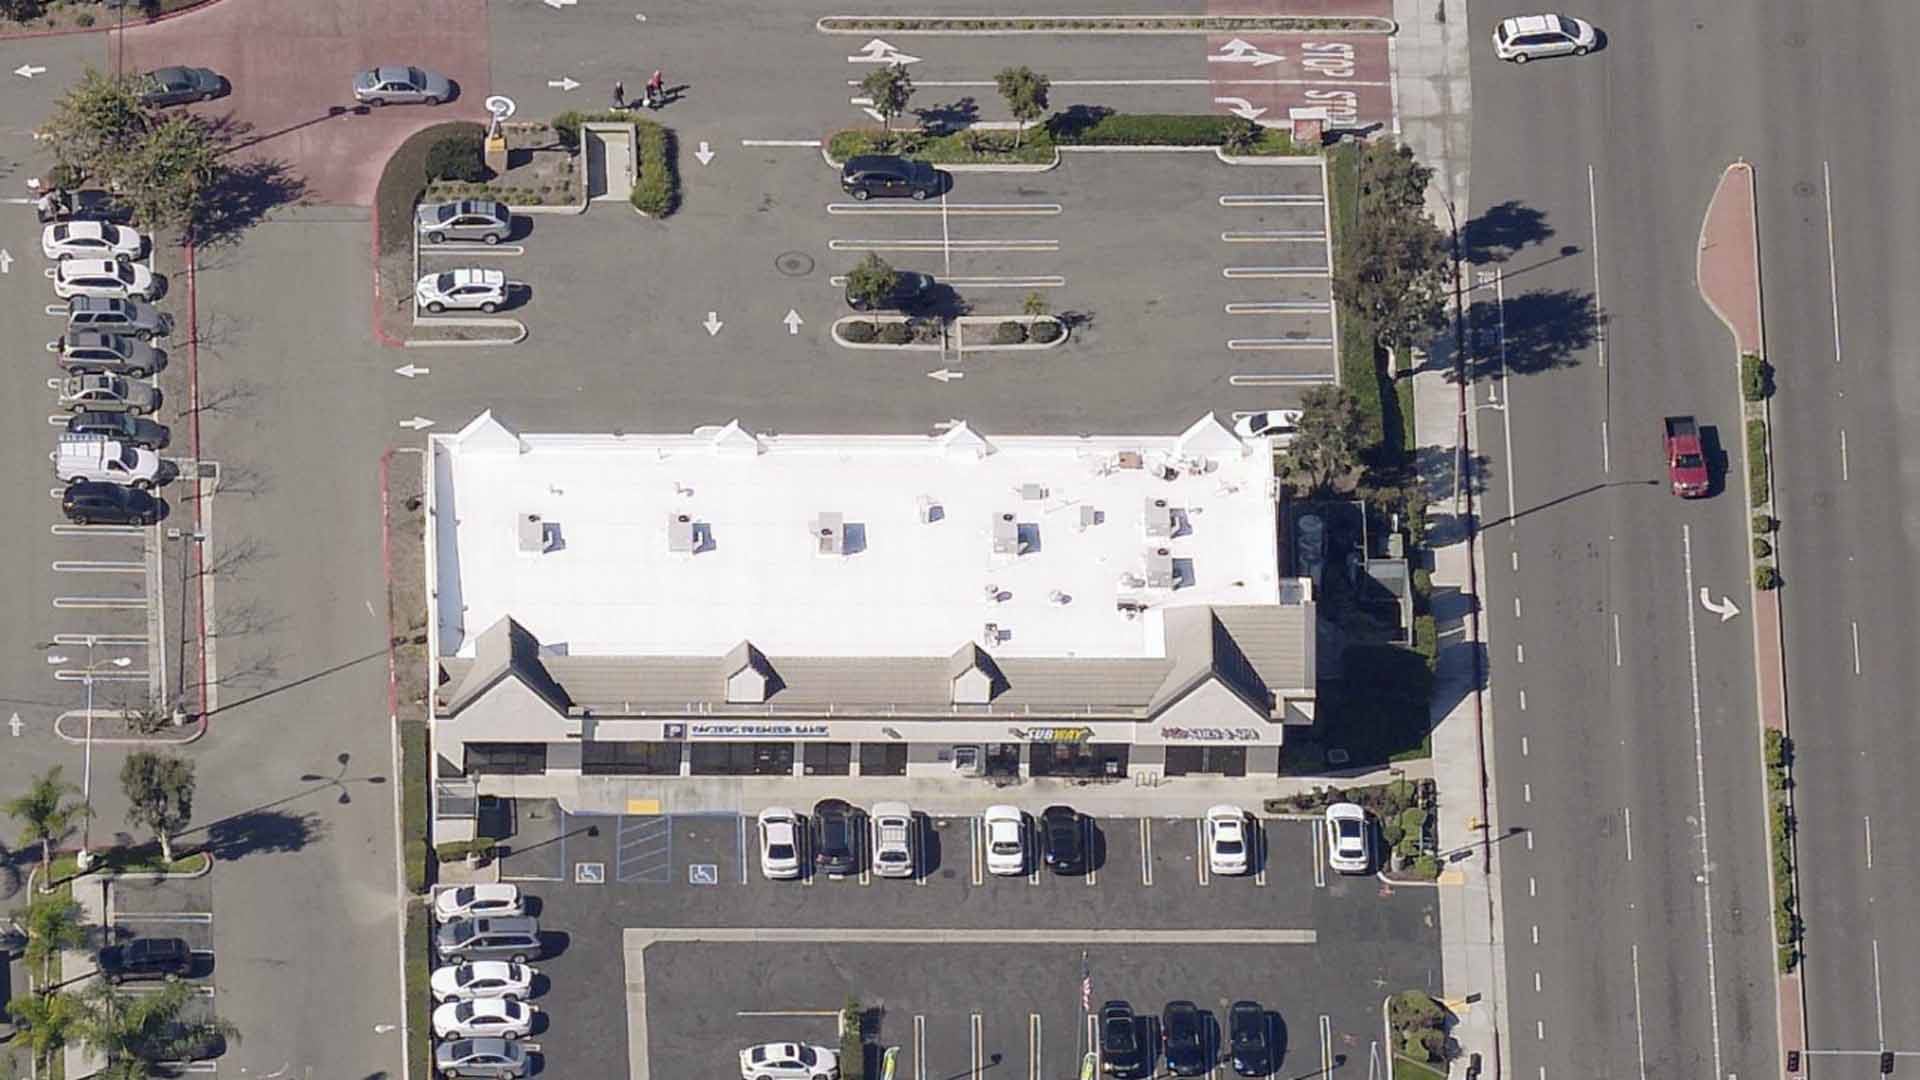 Murrietta Commercial Roofing Project